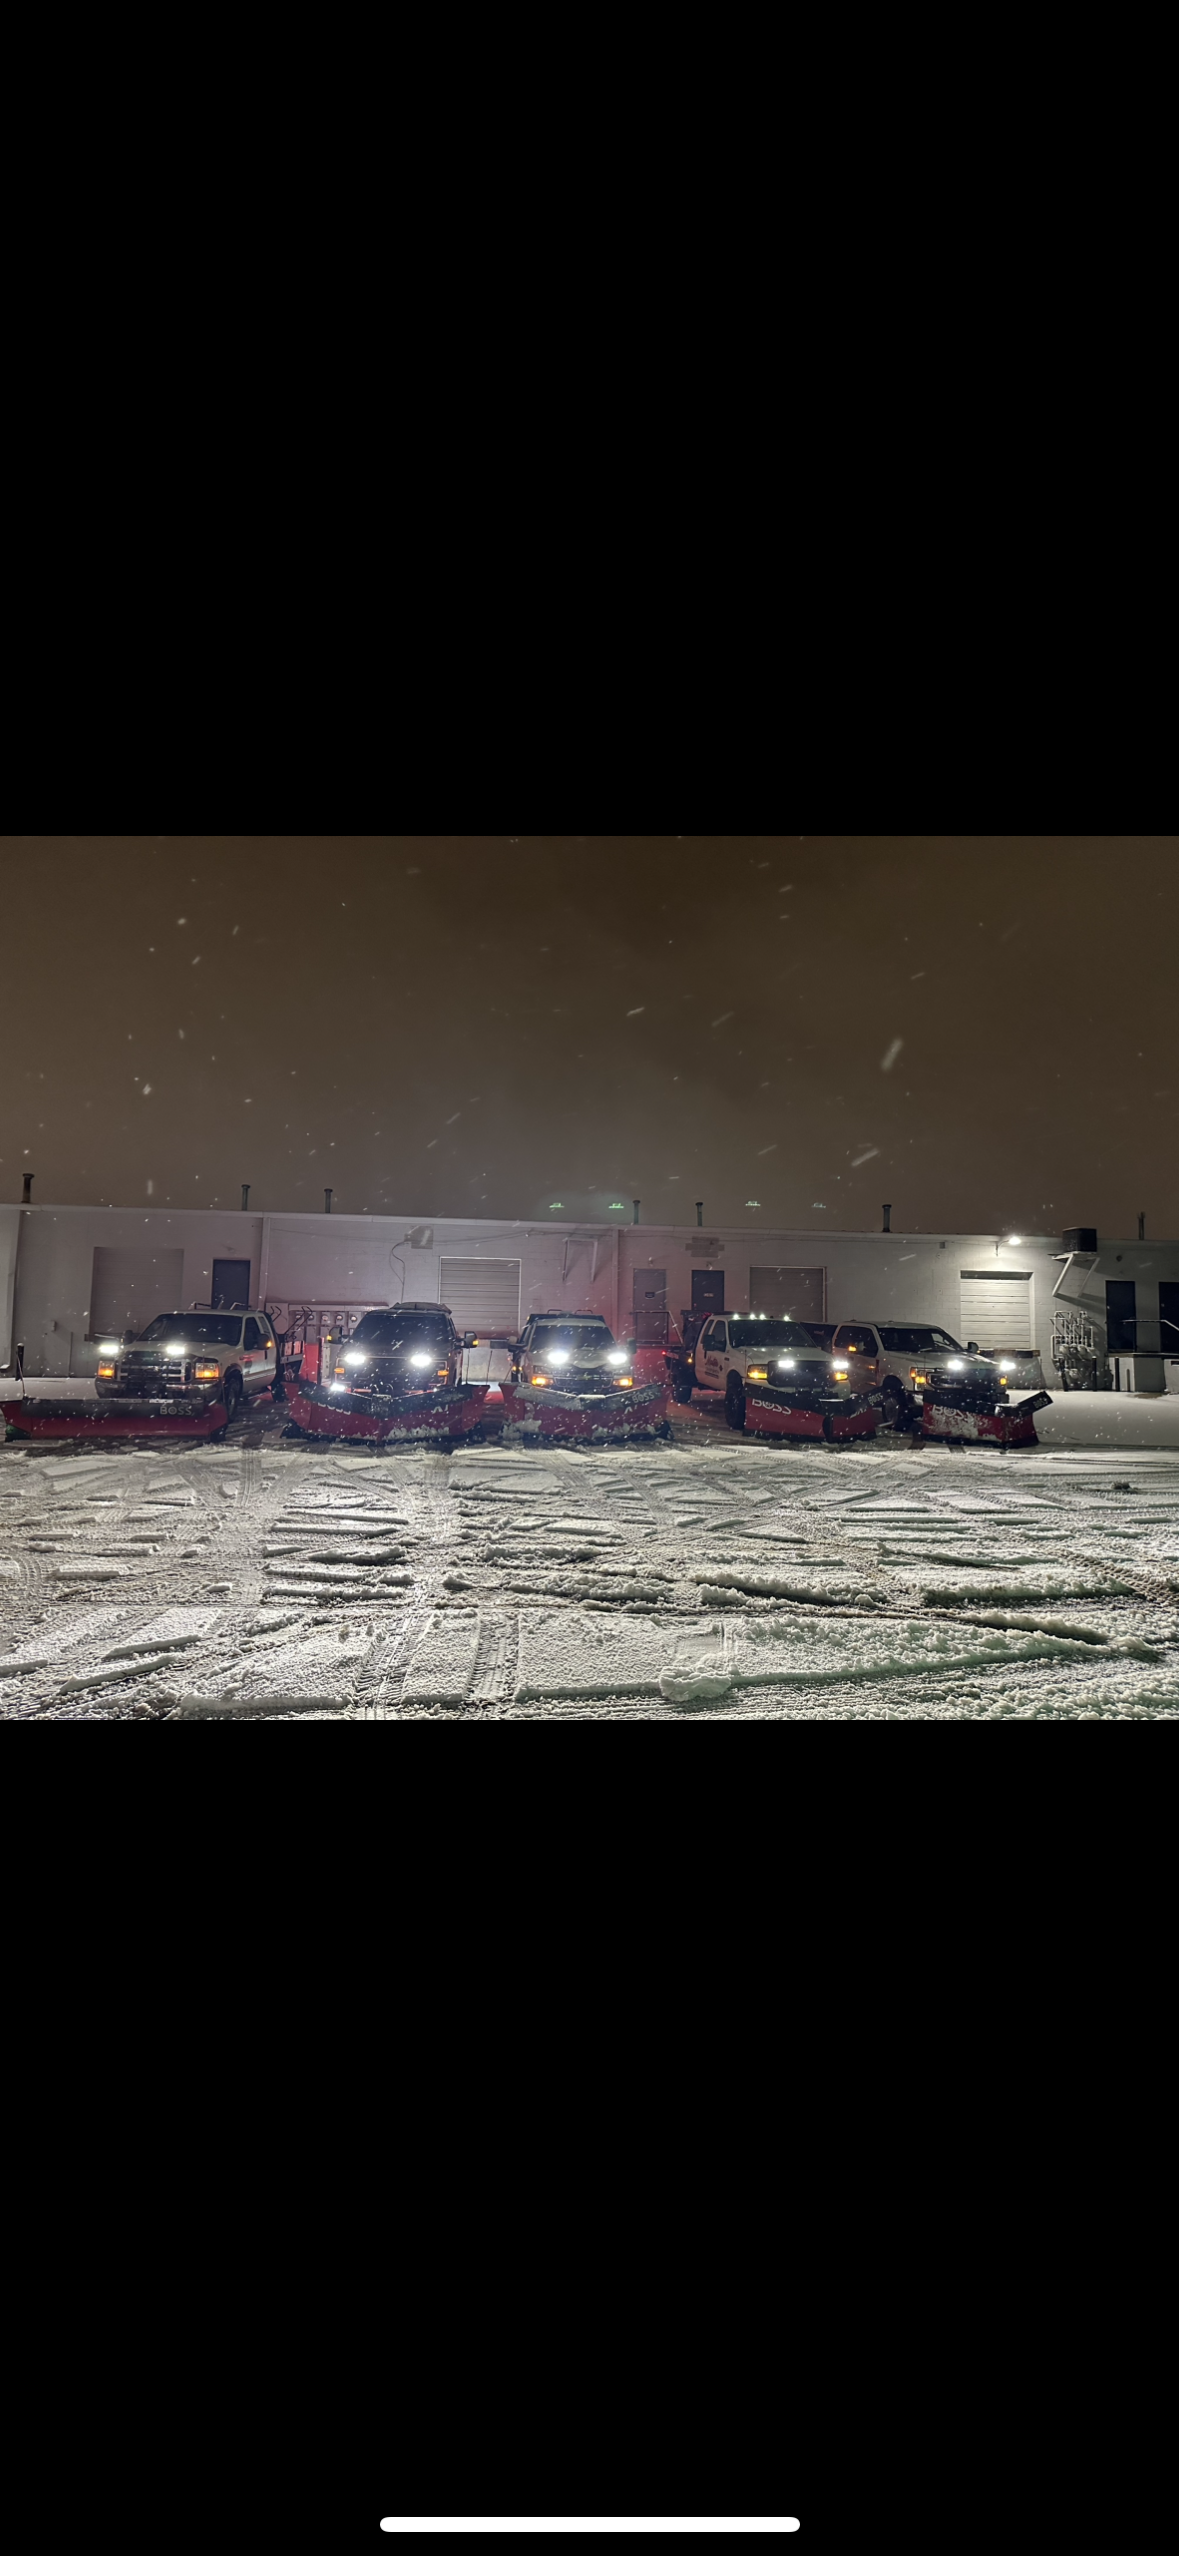 5 snow plowing vehicle side by side ready to plow snow